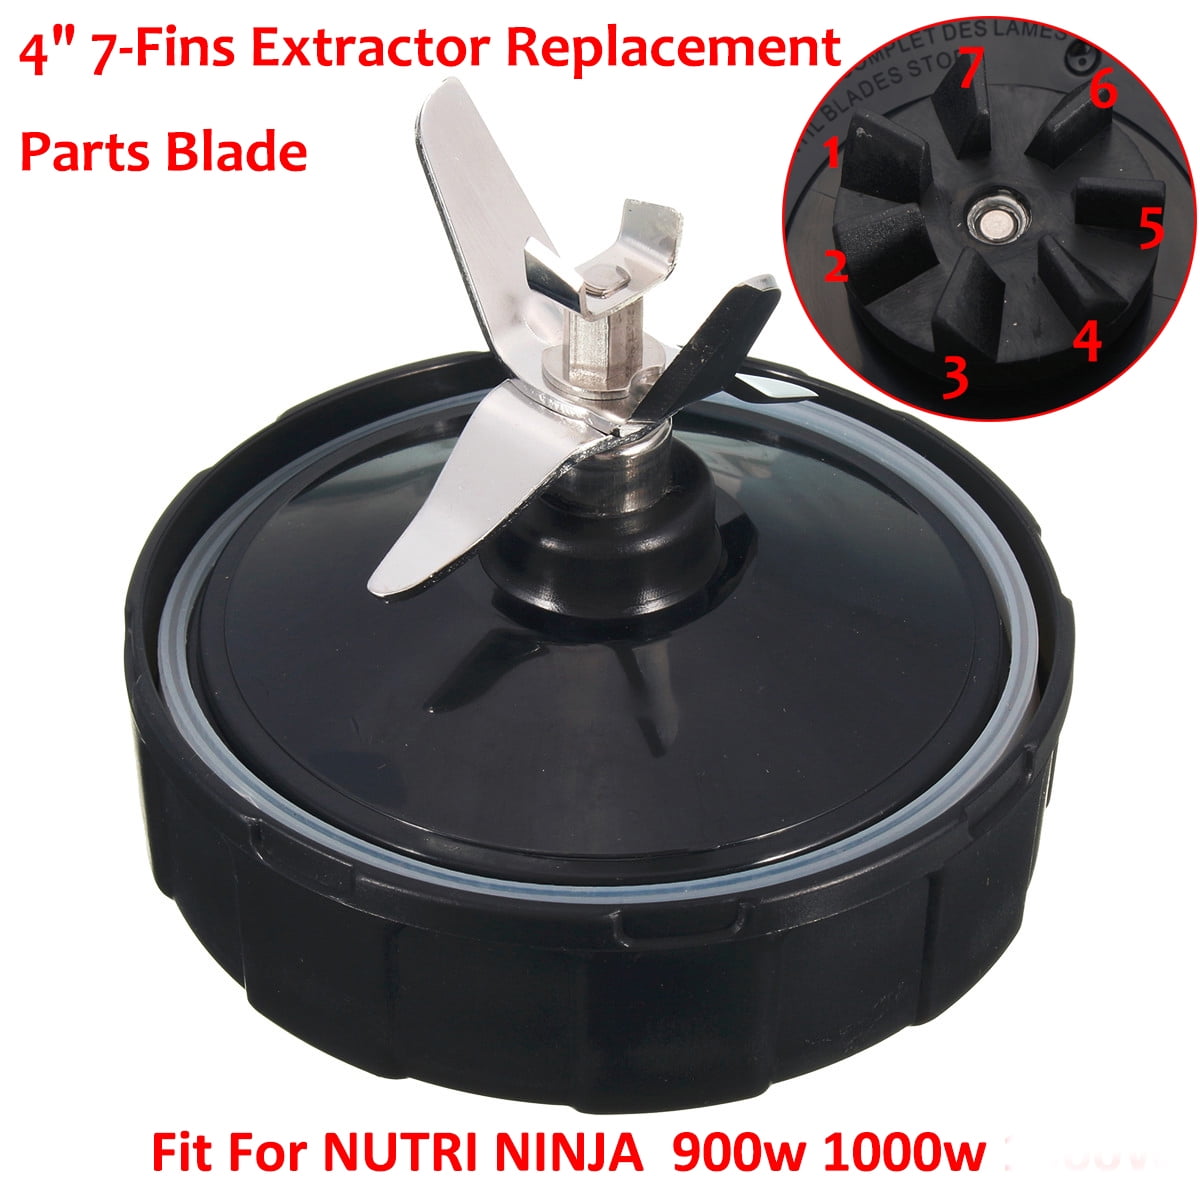 Replacement Parts for Ninja Blender 7 Fins Bottom Blade and 1 Gasket Rubber for Nutri Ninja Auto IQ BL482-30 Bl492 Bl642-30 NN102 BL687CO-30 Bl2013